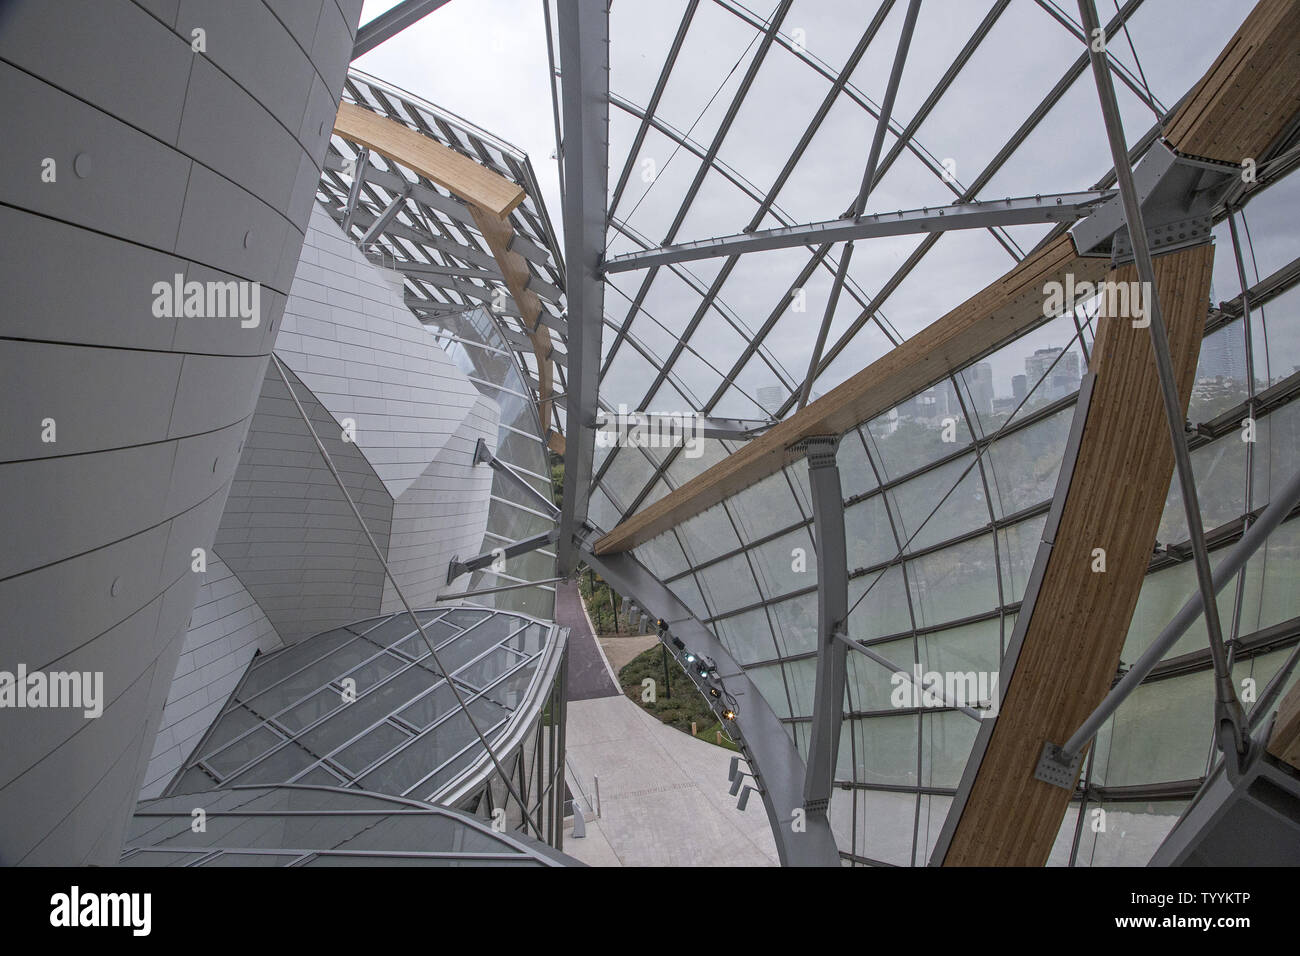 The Louis Vuitton Foundation is seen during its inauguration at